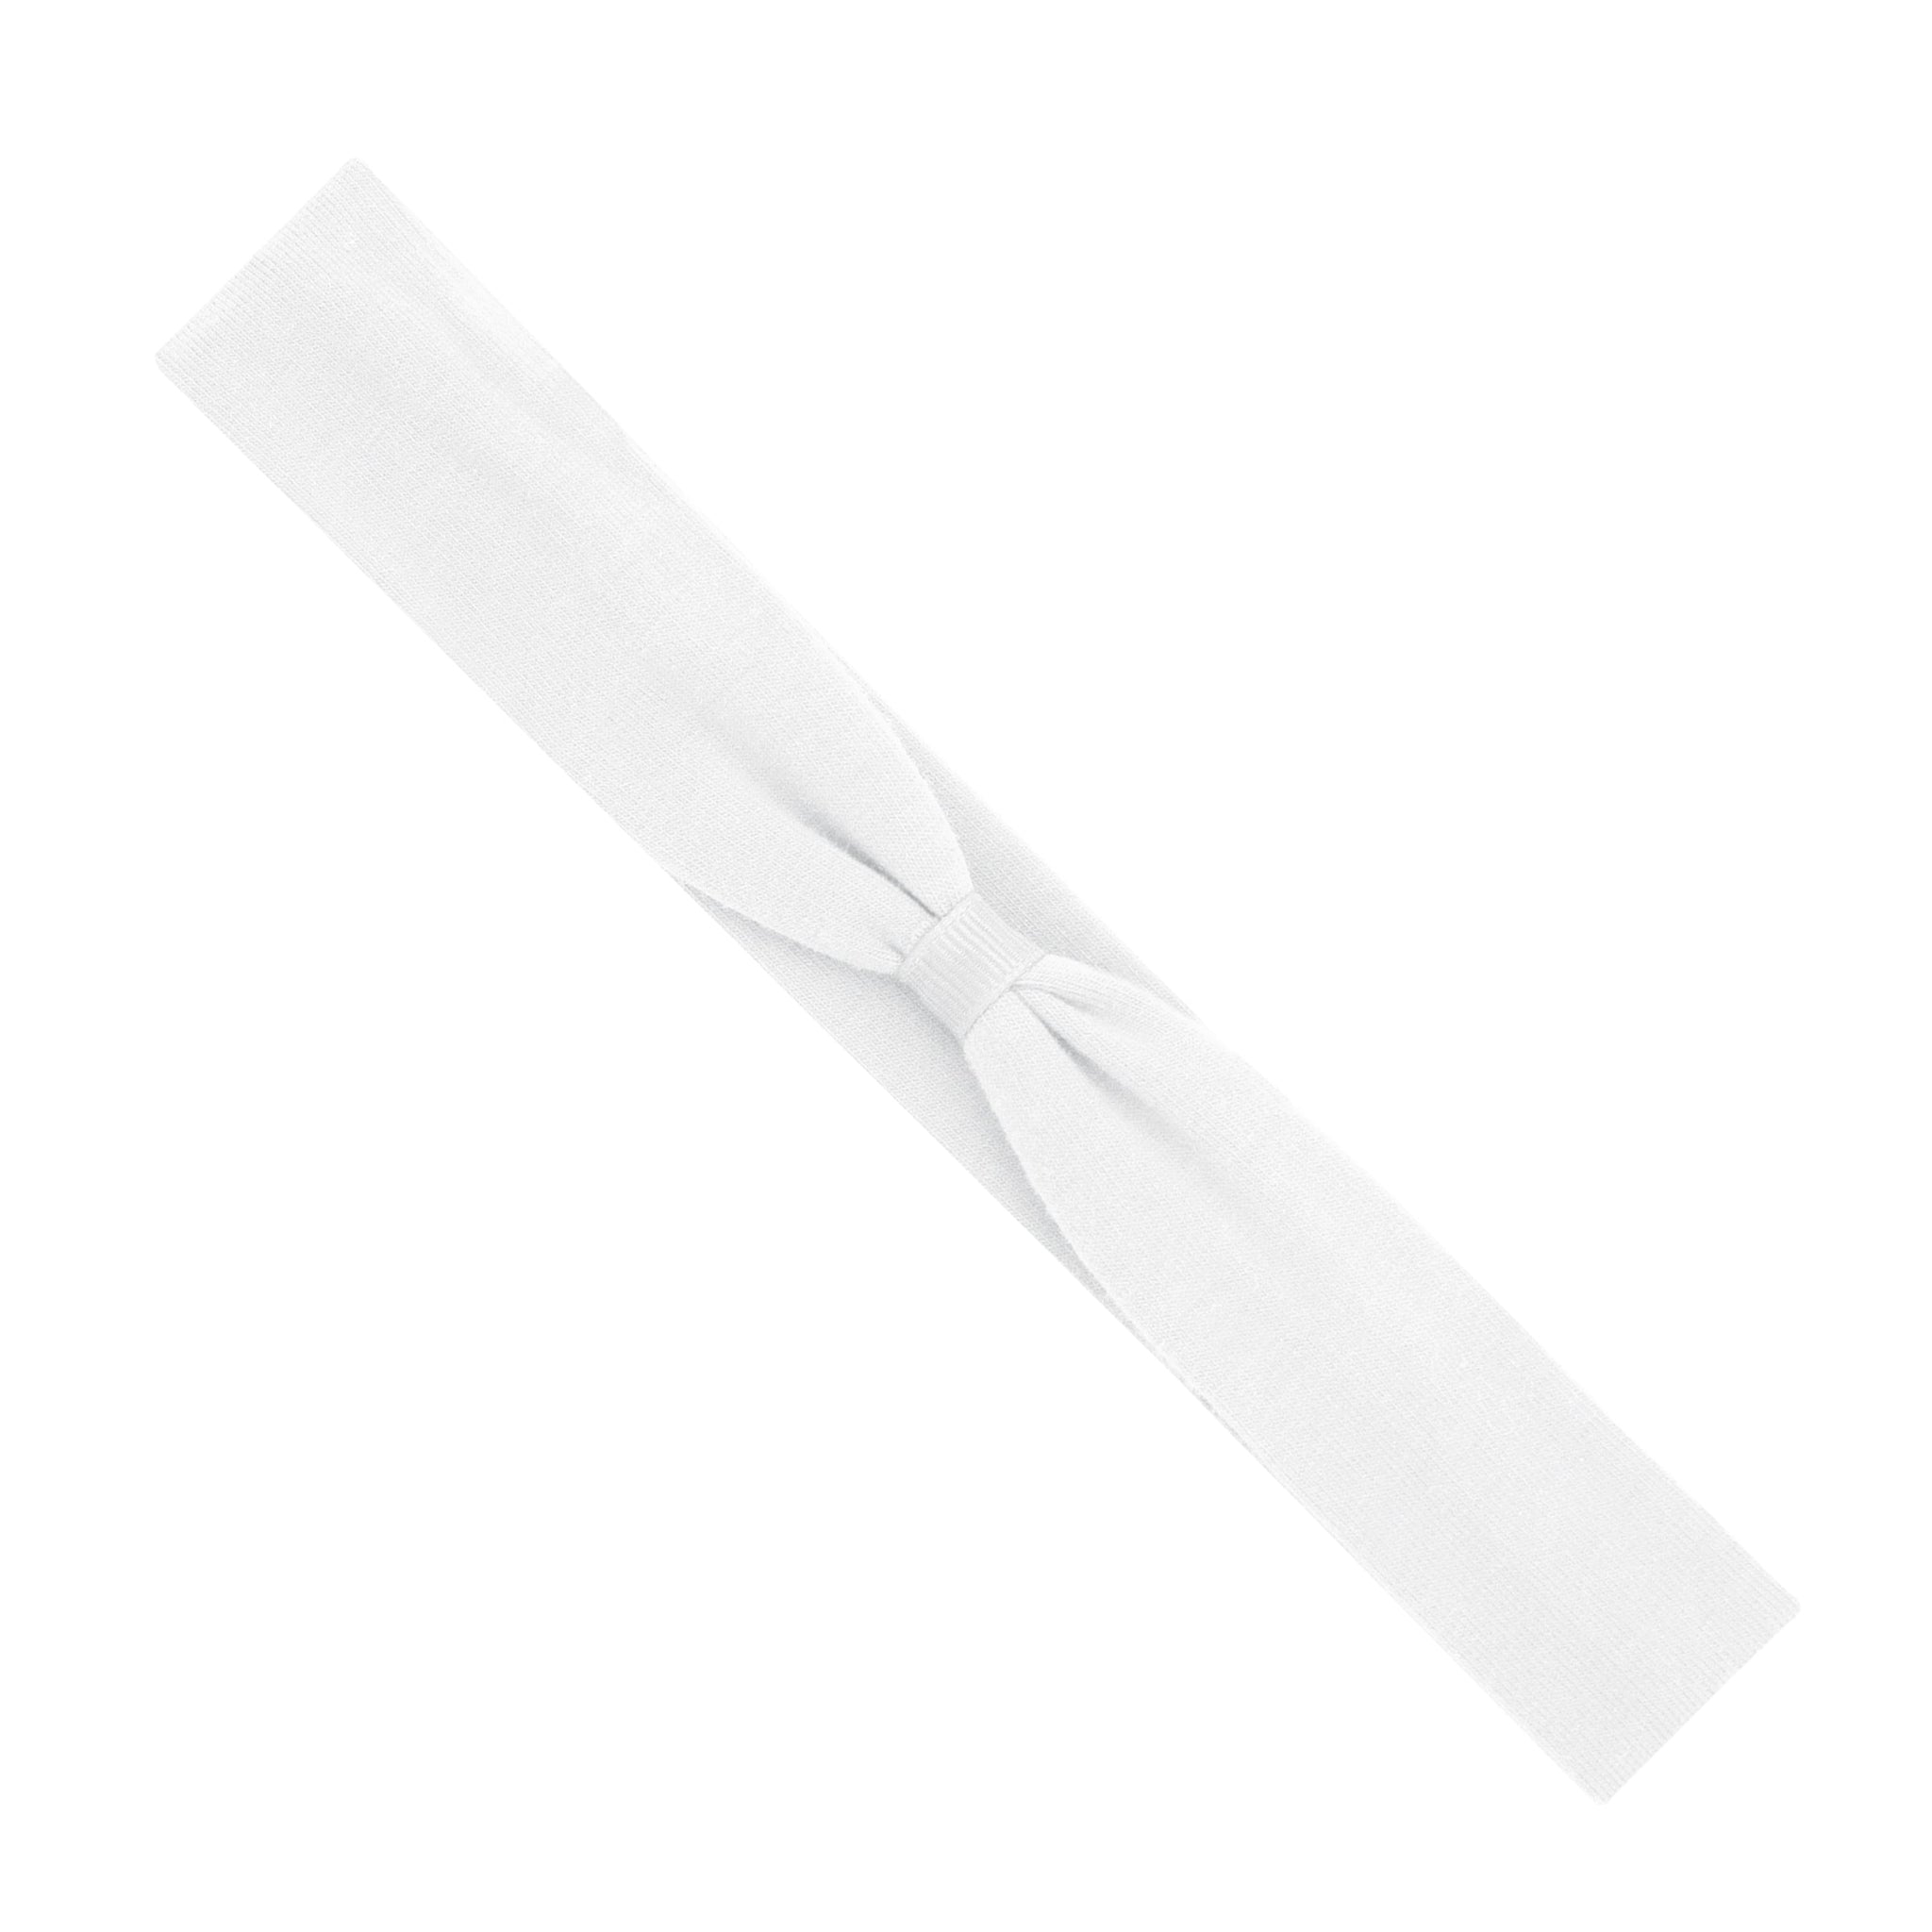 Add-a-Bow Cotton Jersey Baby Girls Hair Wrap